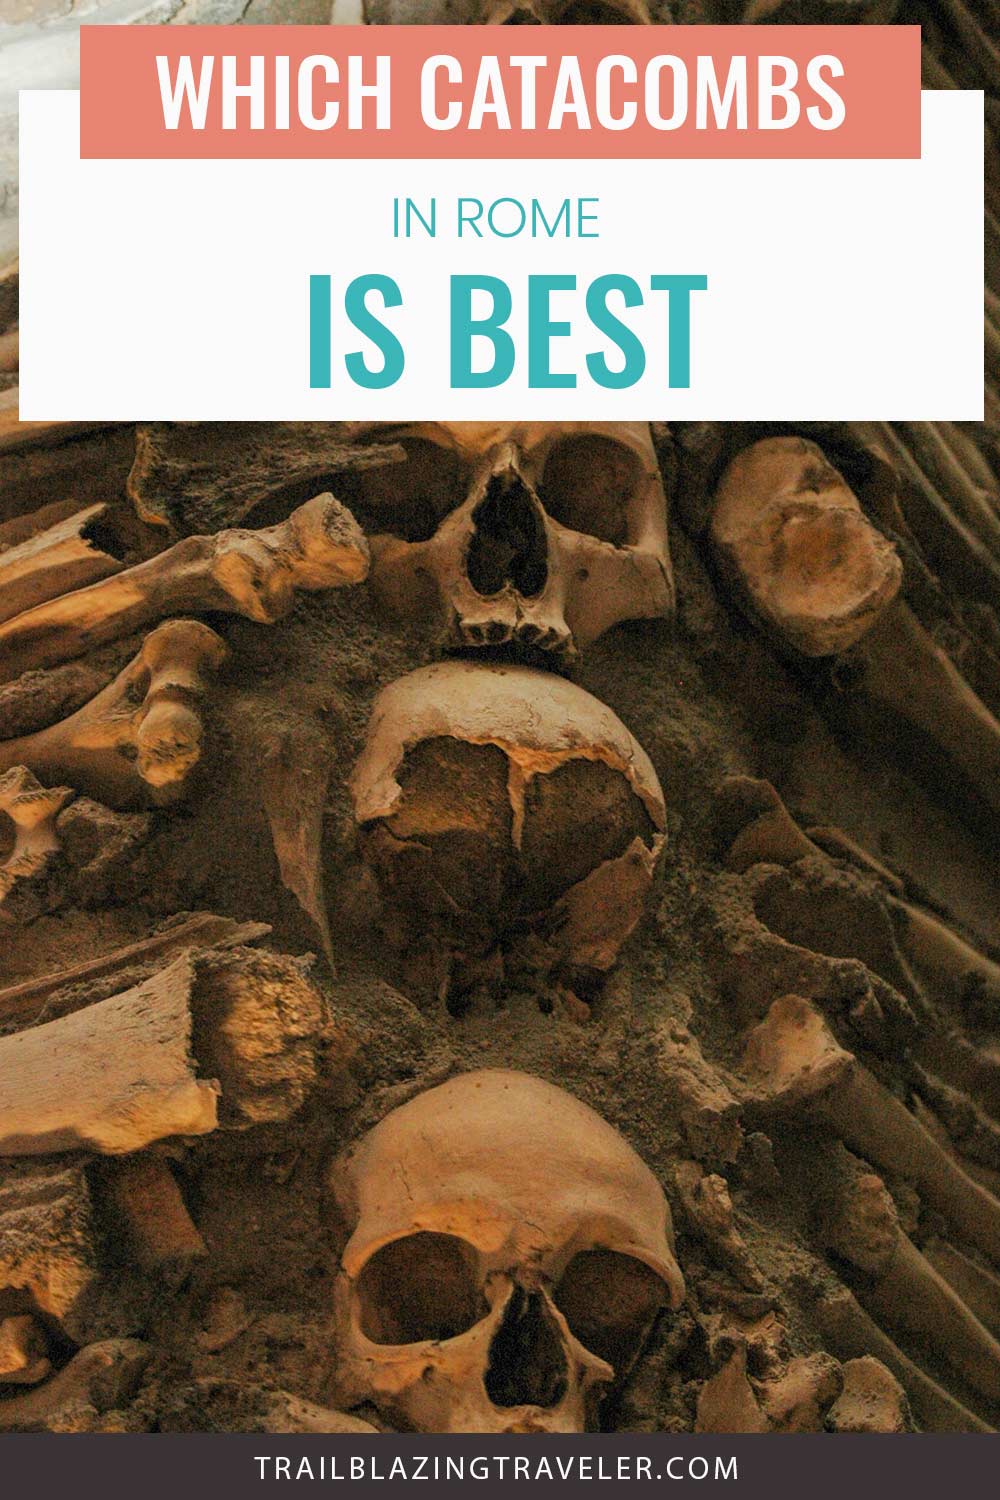 Old pieces of skeletons - Which Catacombs In Rome Is Best?